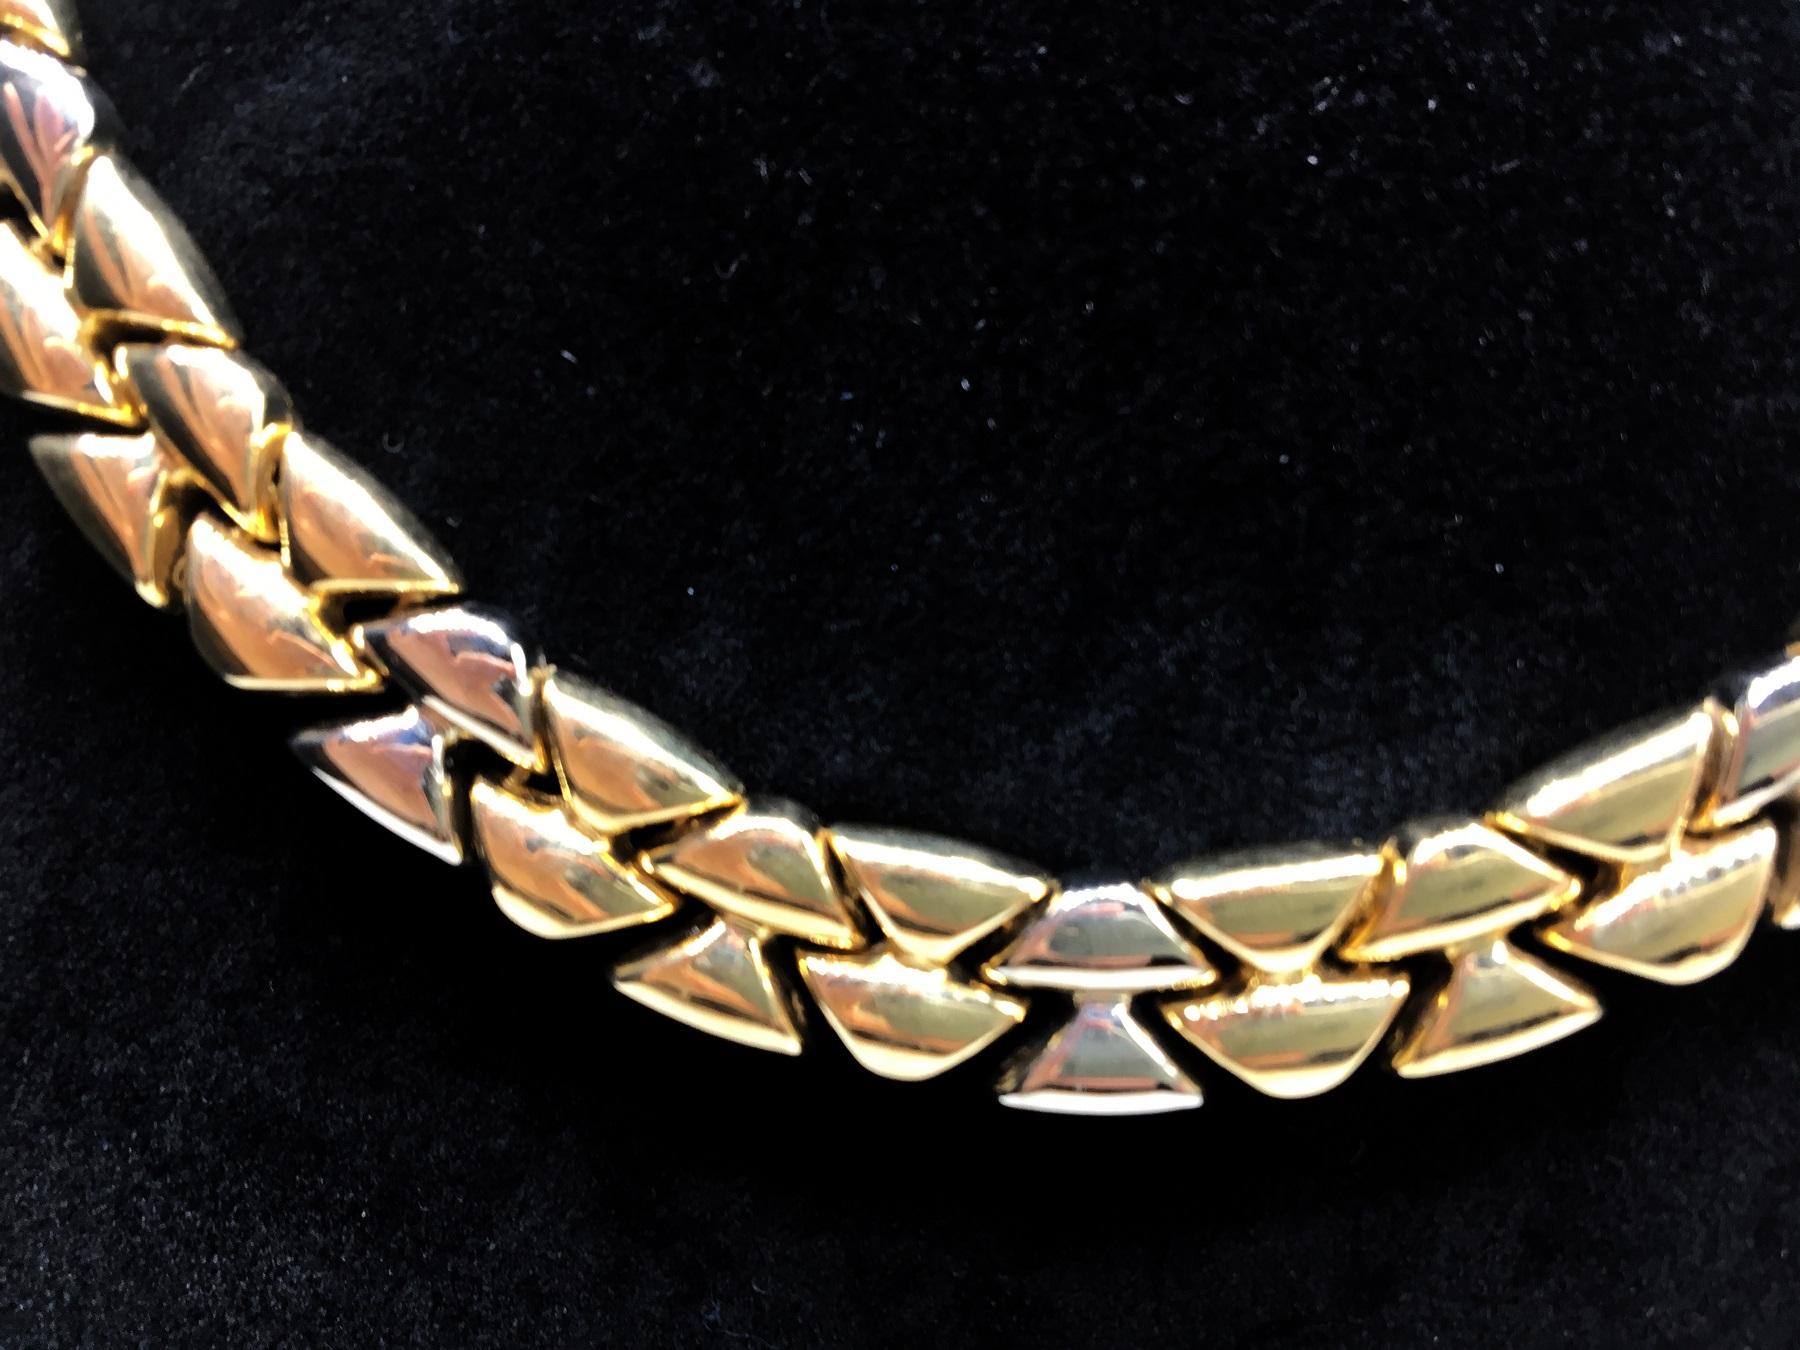 Beautiful choker necklace in yellow and white gold 18 karat. The main material is yellow gold alternated with some details in white gold. Total 56 Grams. Italian production. A very refined necklace perfect for an elegant woman.